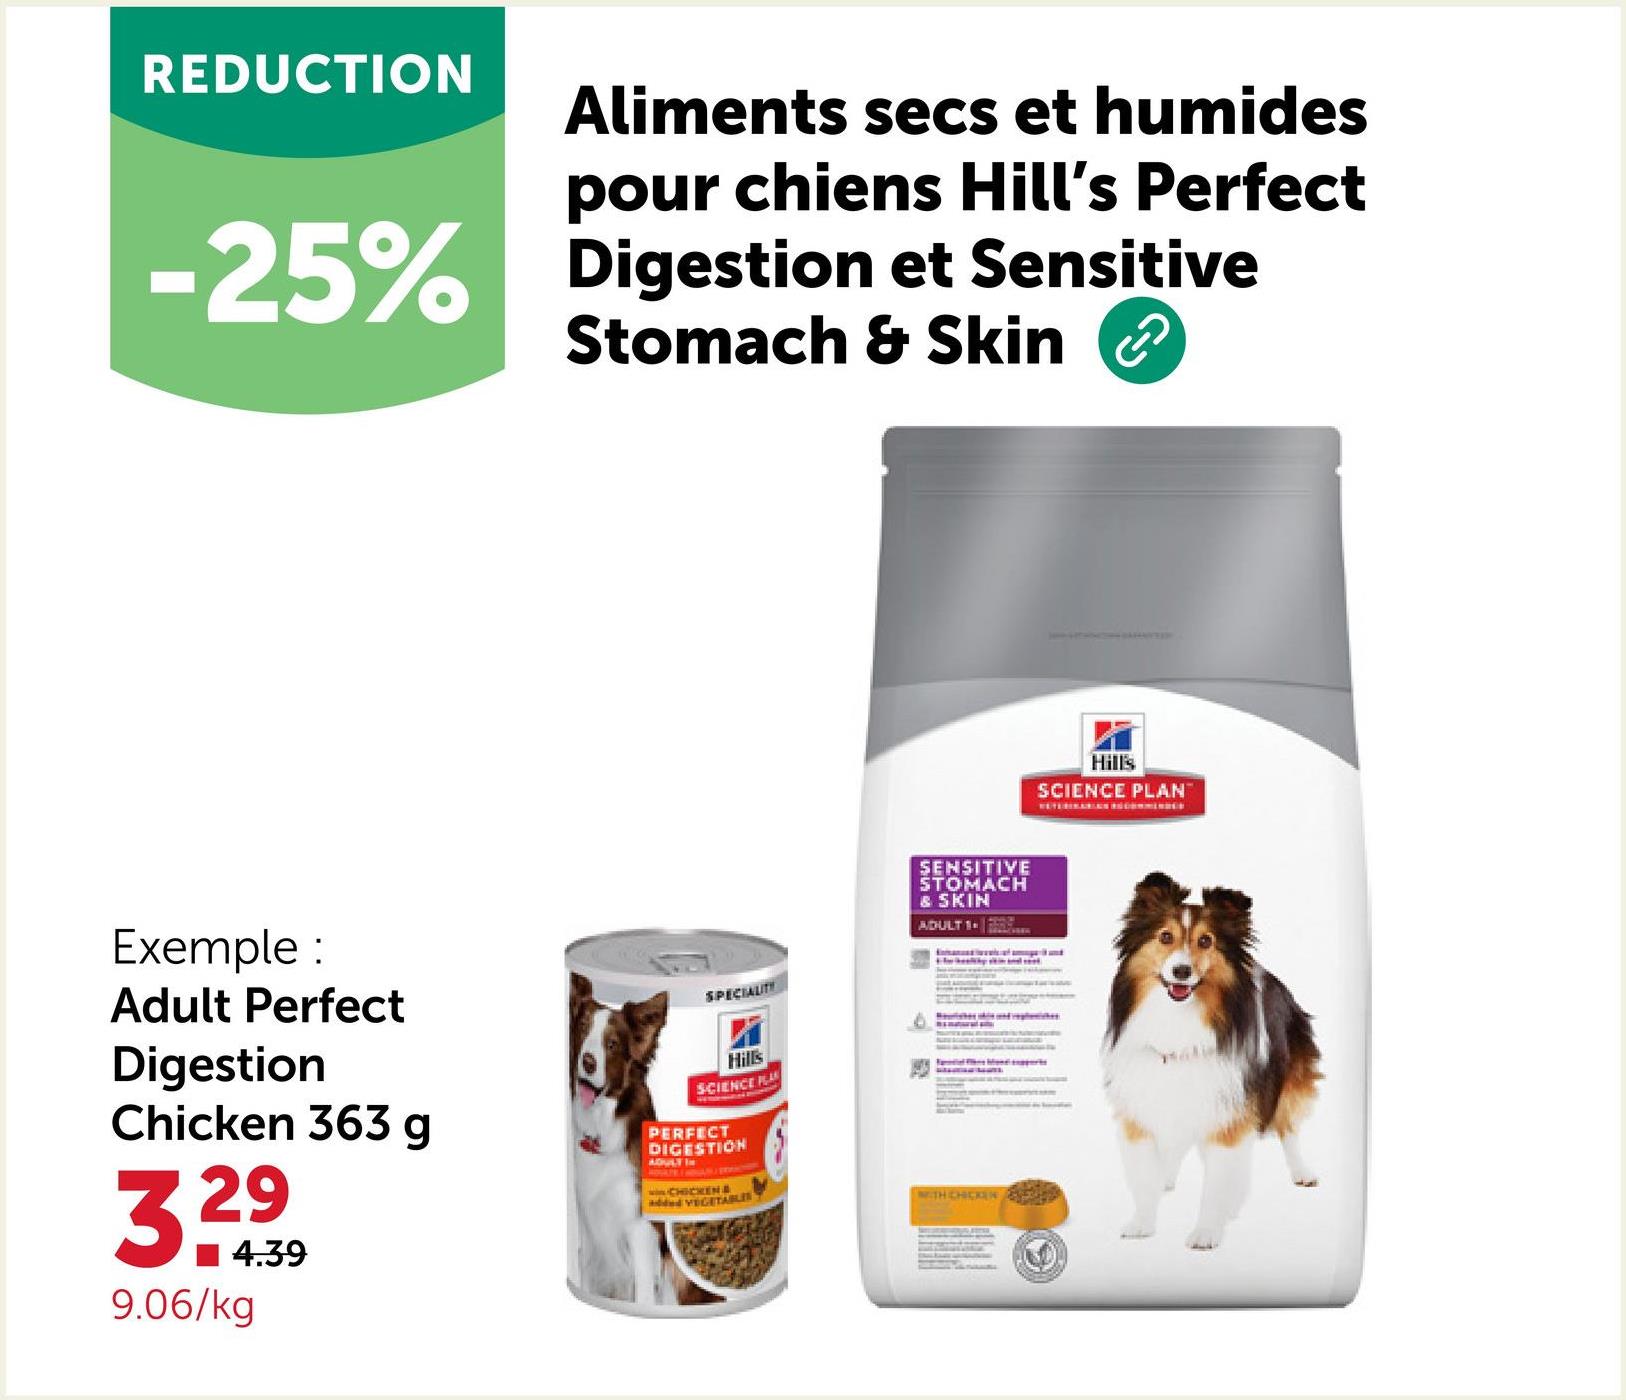 REDUCTION
Aliments secs et humides
pour chiens Hill's Perfect
-25% Digestion et Sensitive
Stomach & Skin
Exemple :
Adult Perfect
Digestion
Chicken 363 g
329
■4.39
9.06/kg
SPECIALITY
Hills
SCIENCE PLA
PERFECT
DIGESTION
ADULT IN
wwwCHICKEN &
added VEGETABLES
SENSITIVE
STOMACH
& SKIN
ADULT 1...
WITH CHICKEN
Hill's
SCIENCE PLAN